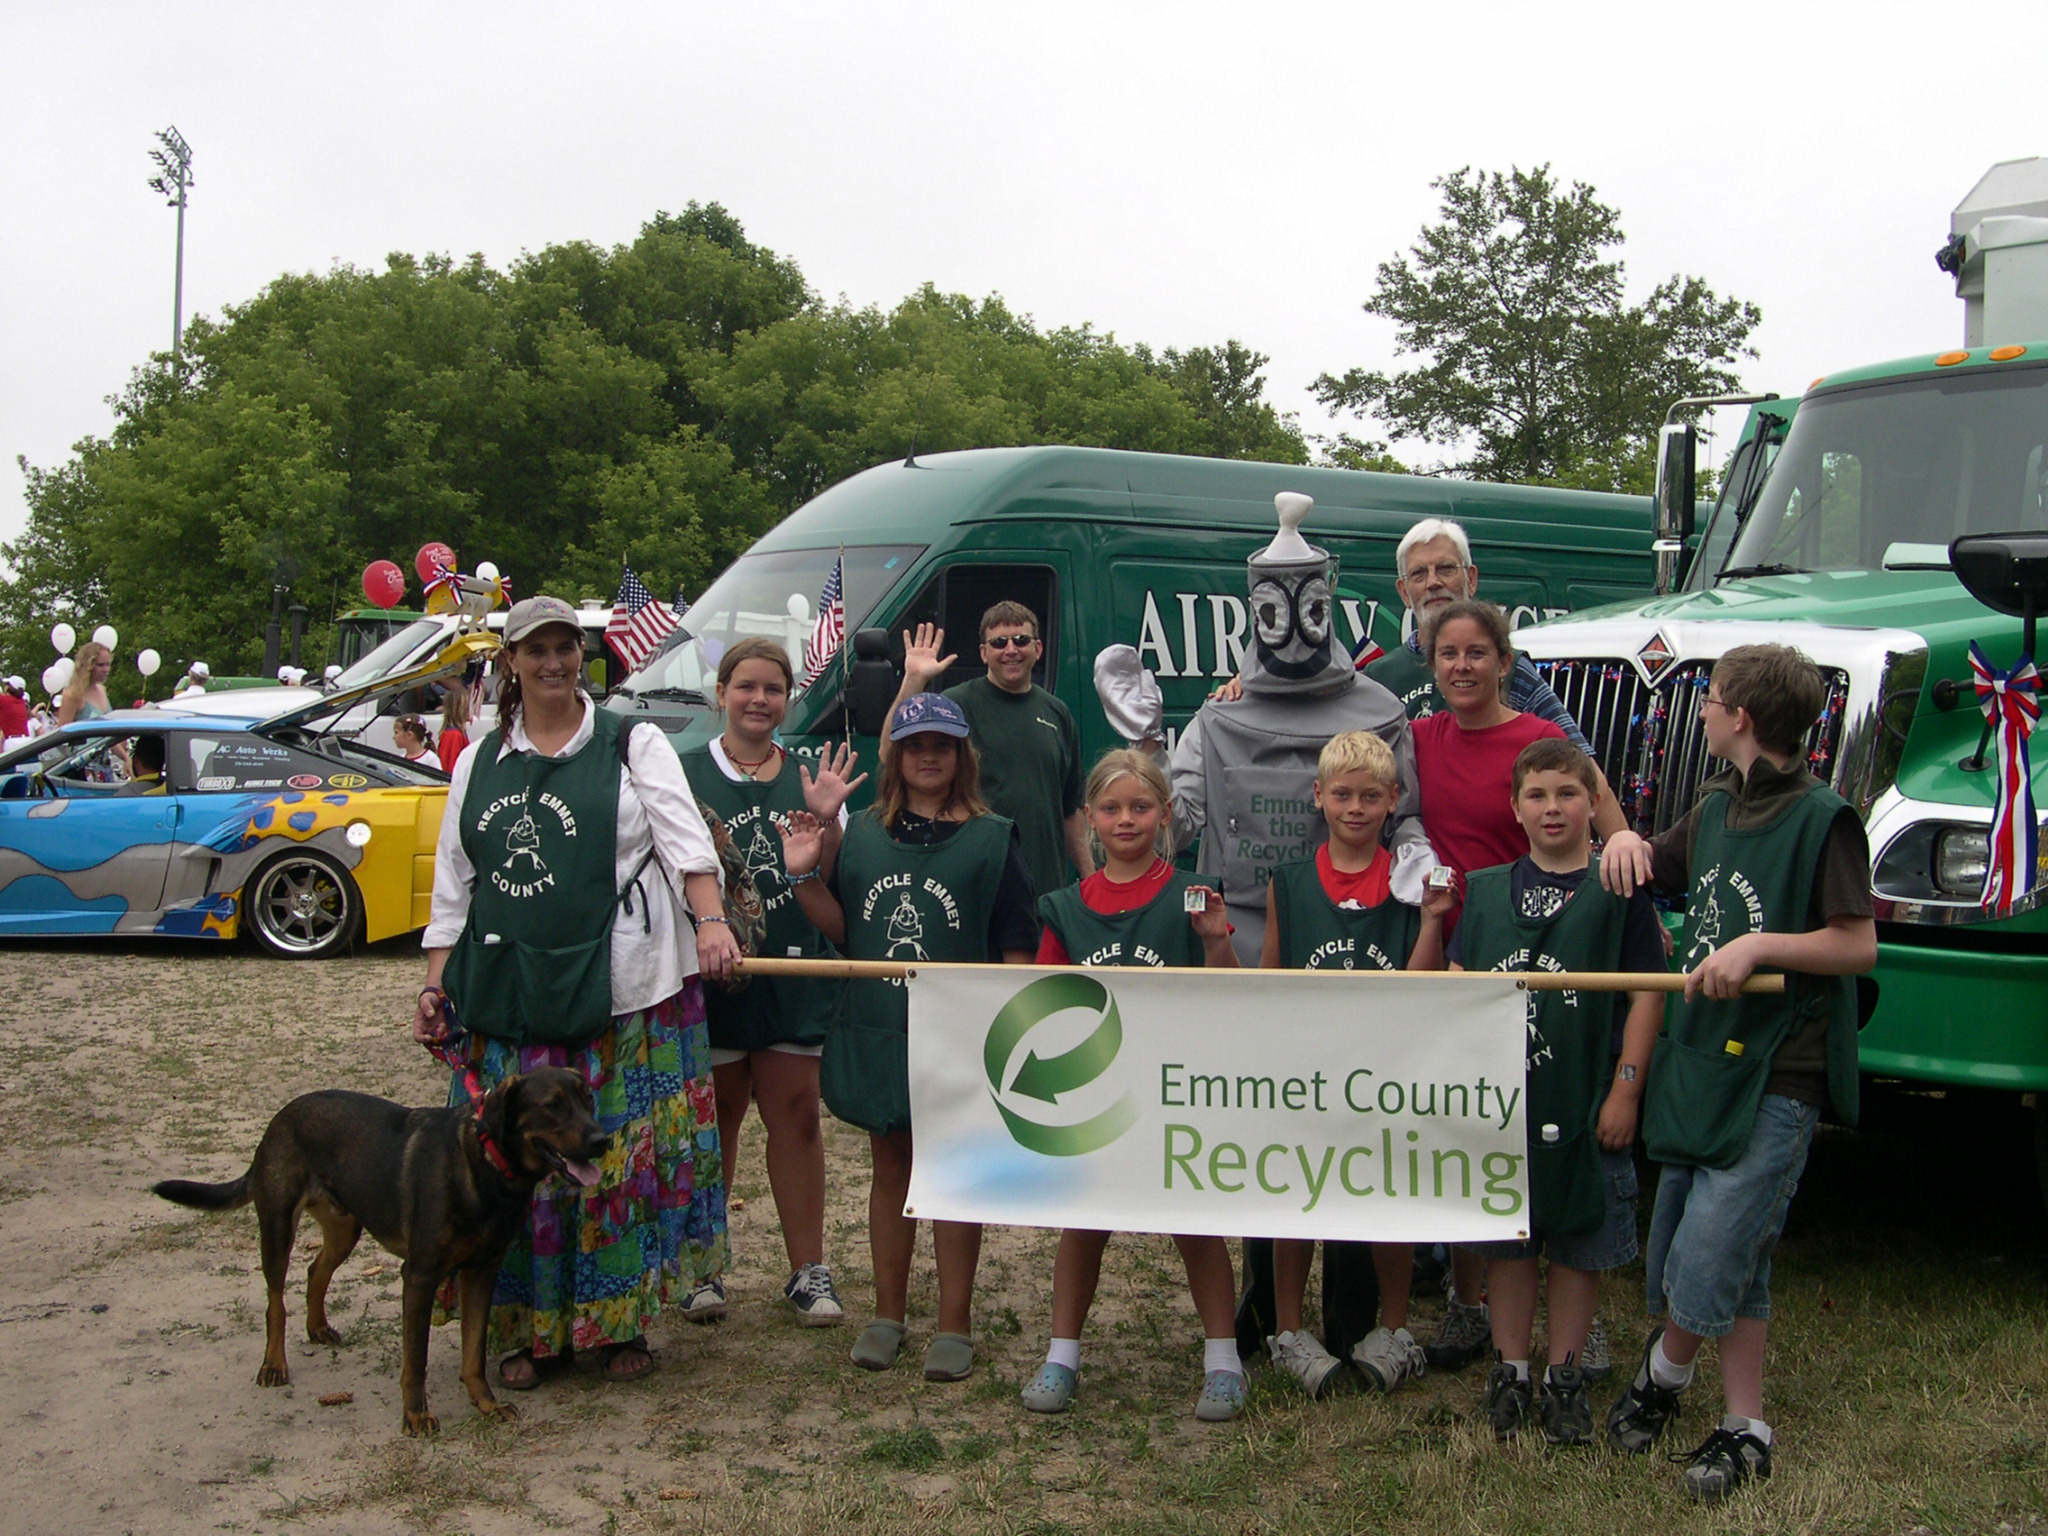 Emmet the Recycling Robot and a group of people holding a banner that says Emmet County Recycling.